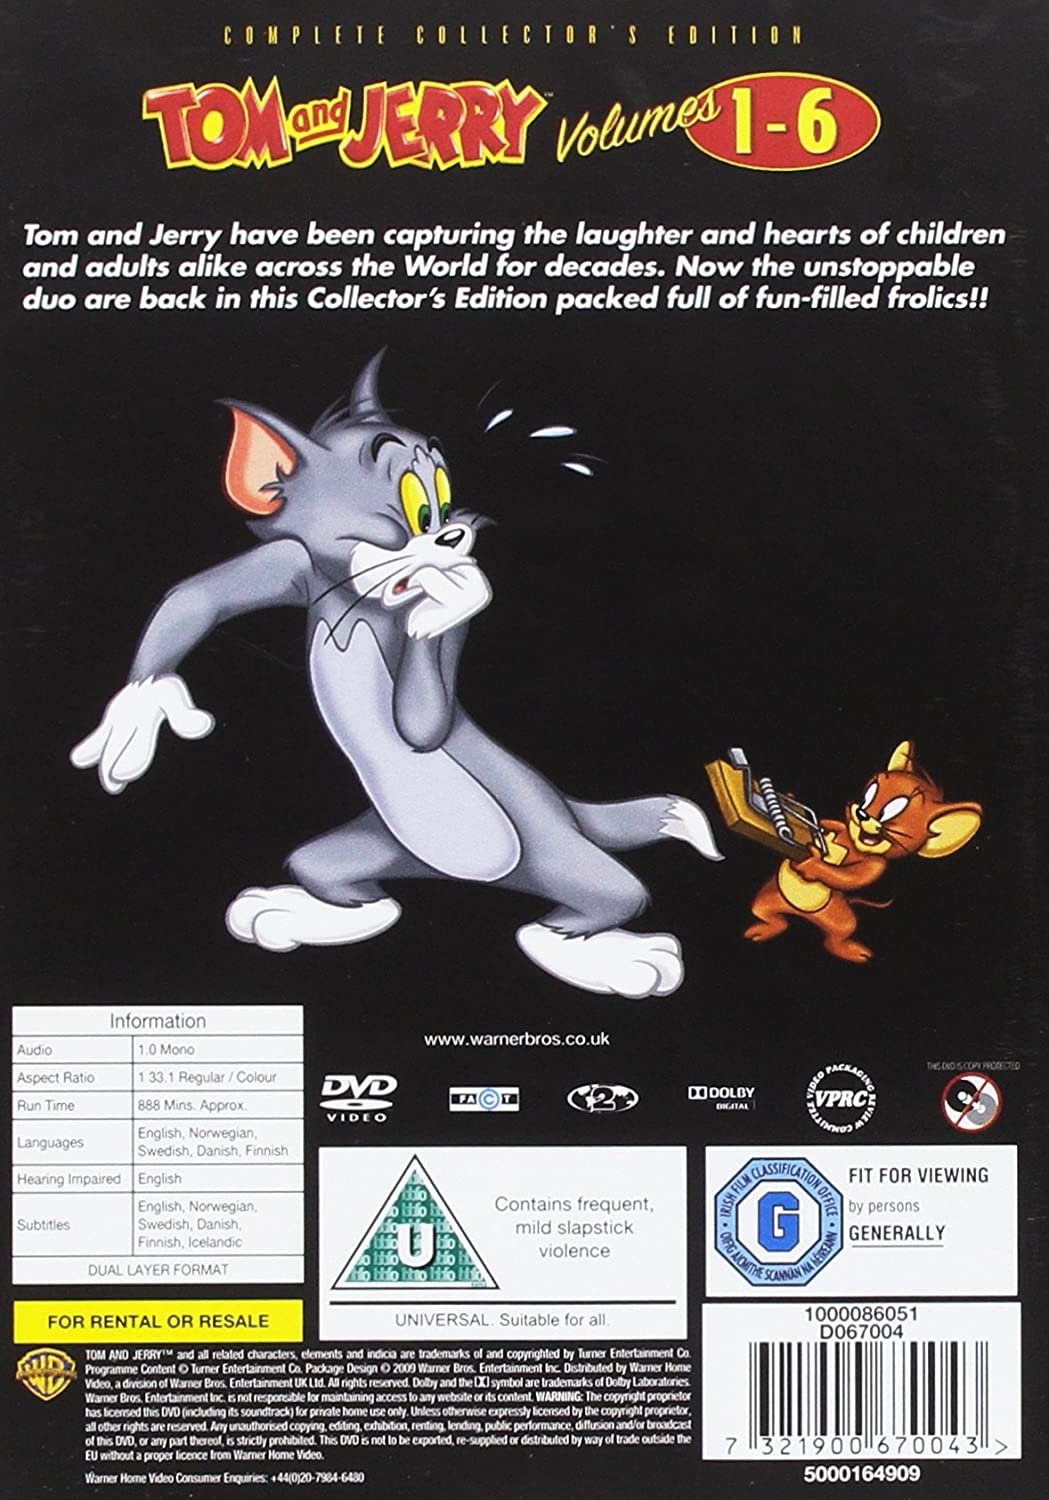 Tom And Jerry - Complete Volumes 1-6 - Comedy [DVD]